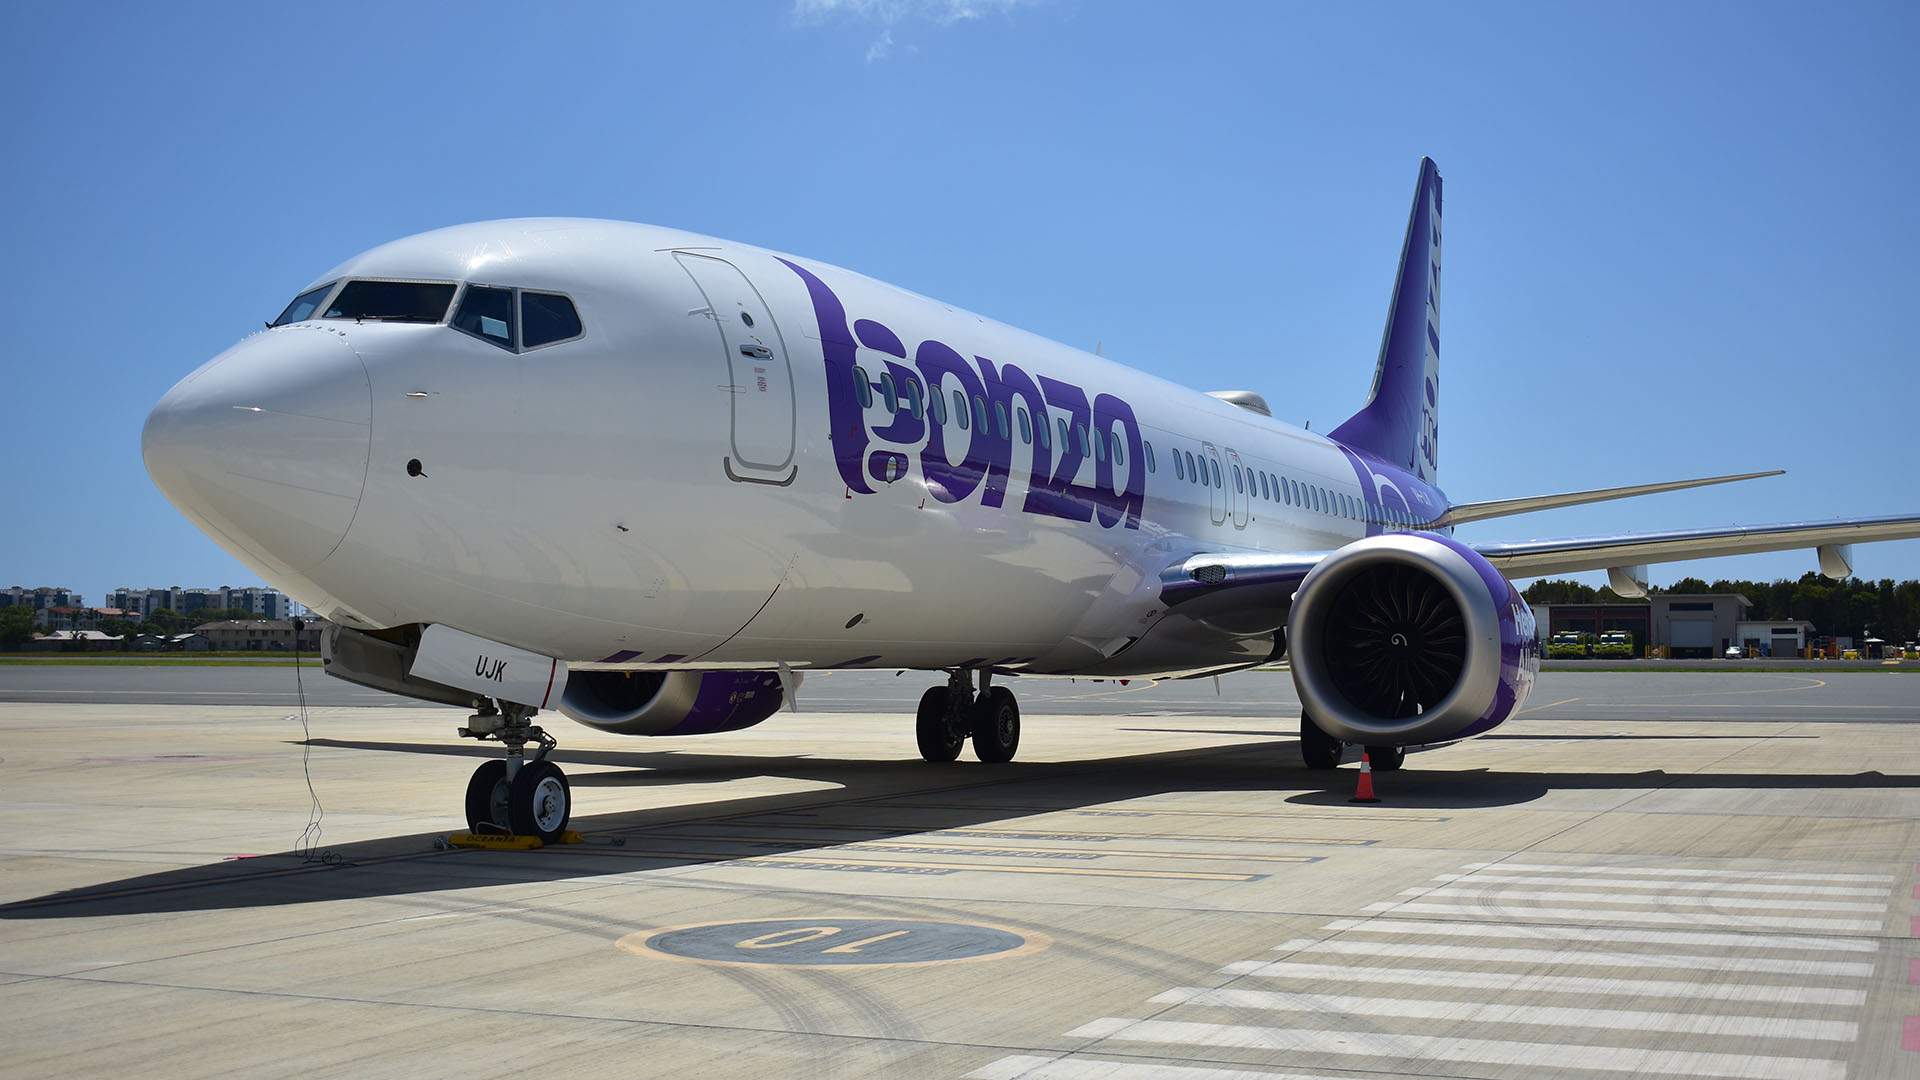 Budget Airline Bonza Has Suspended Flights While It Assesses 